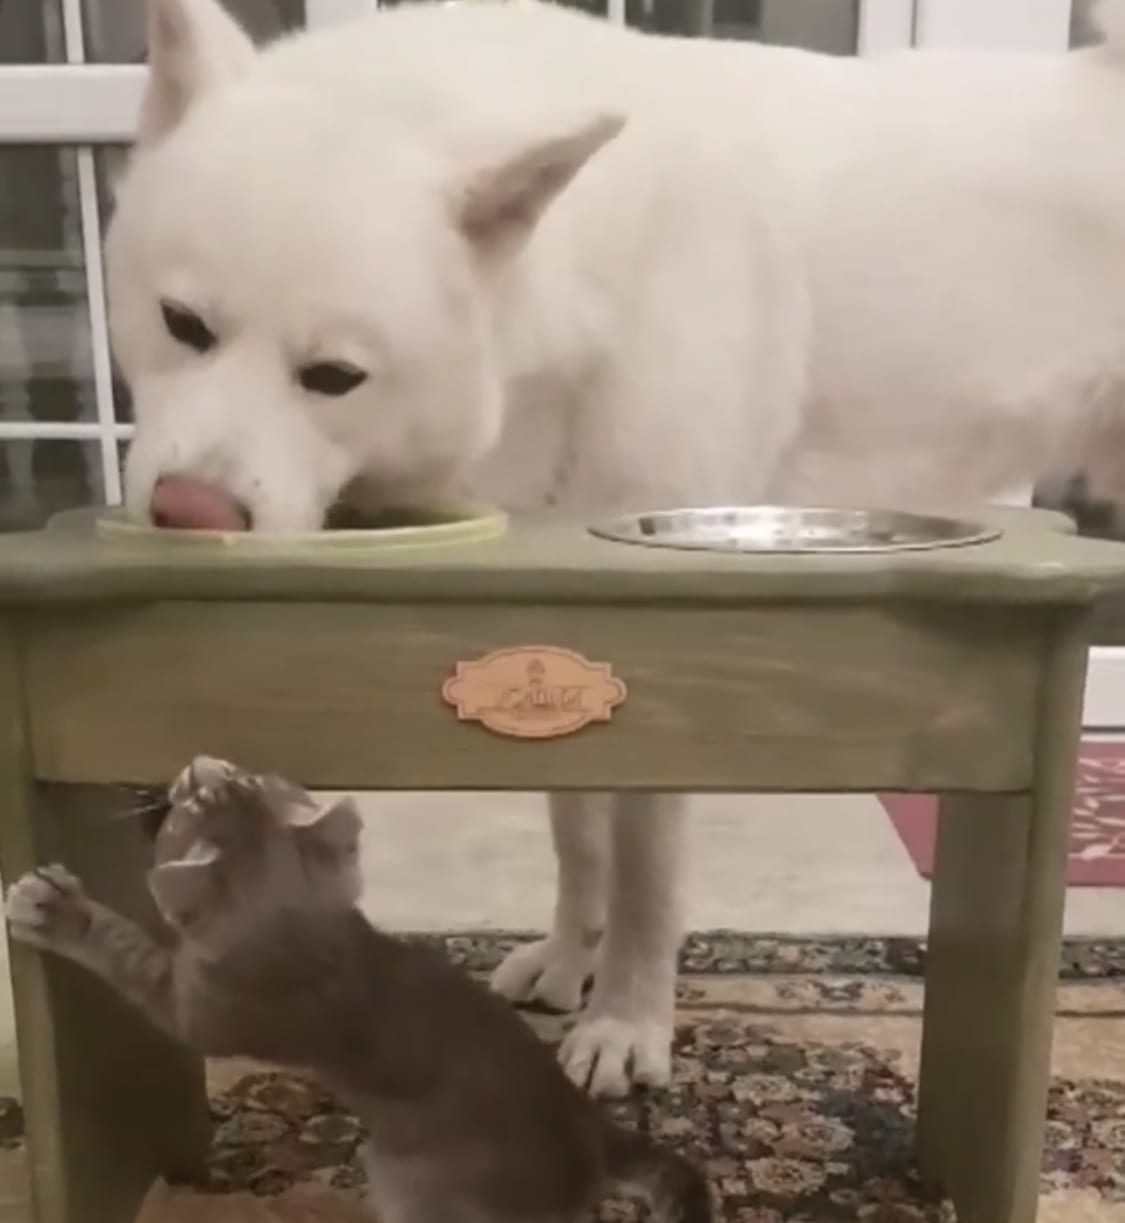 Akita eating its food from the bowl on table while a cat is standing up behind the bowl